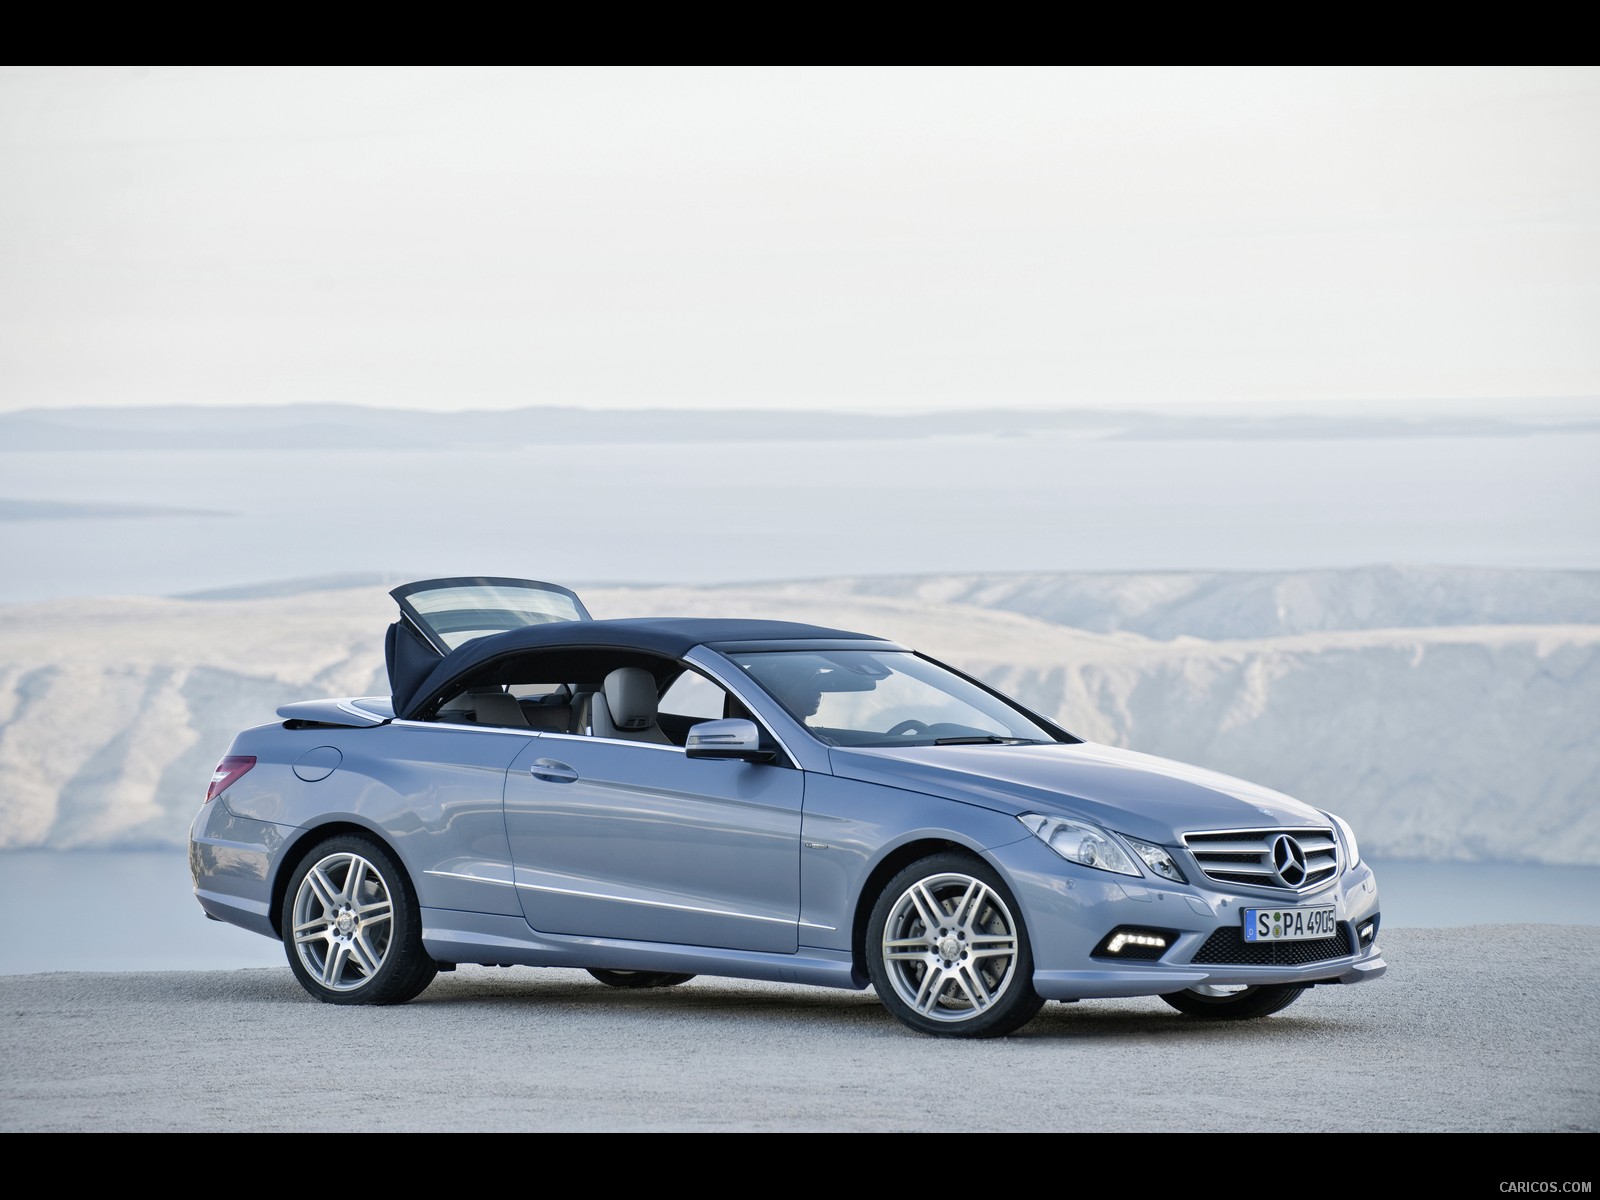 Mercedes-Benz E-Class Cabriolet - Top In Action - , #44 of 165